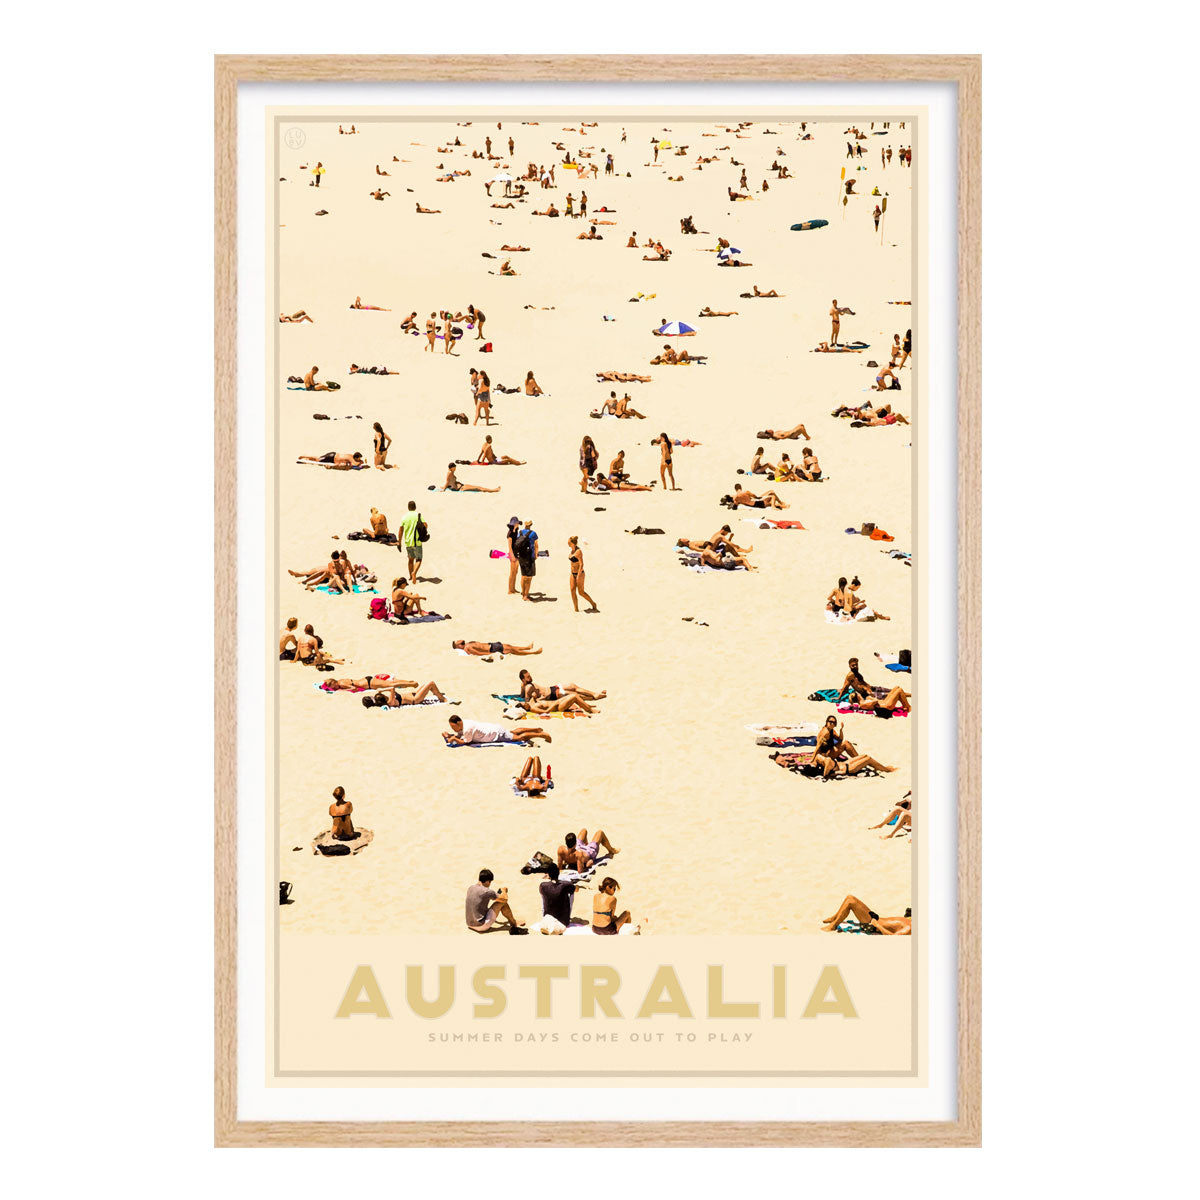 Australia Beach retro vintage print poster in oak frame from Places We Luv